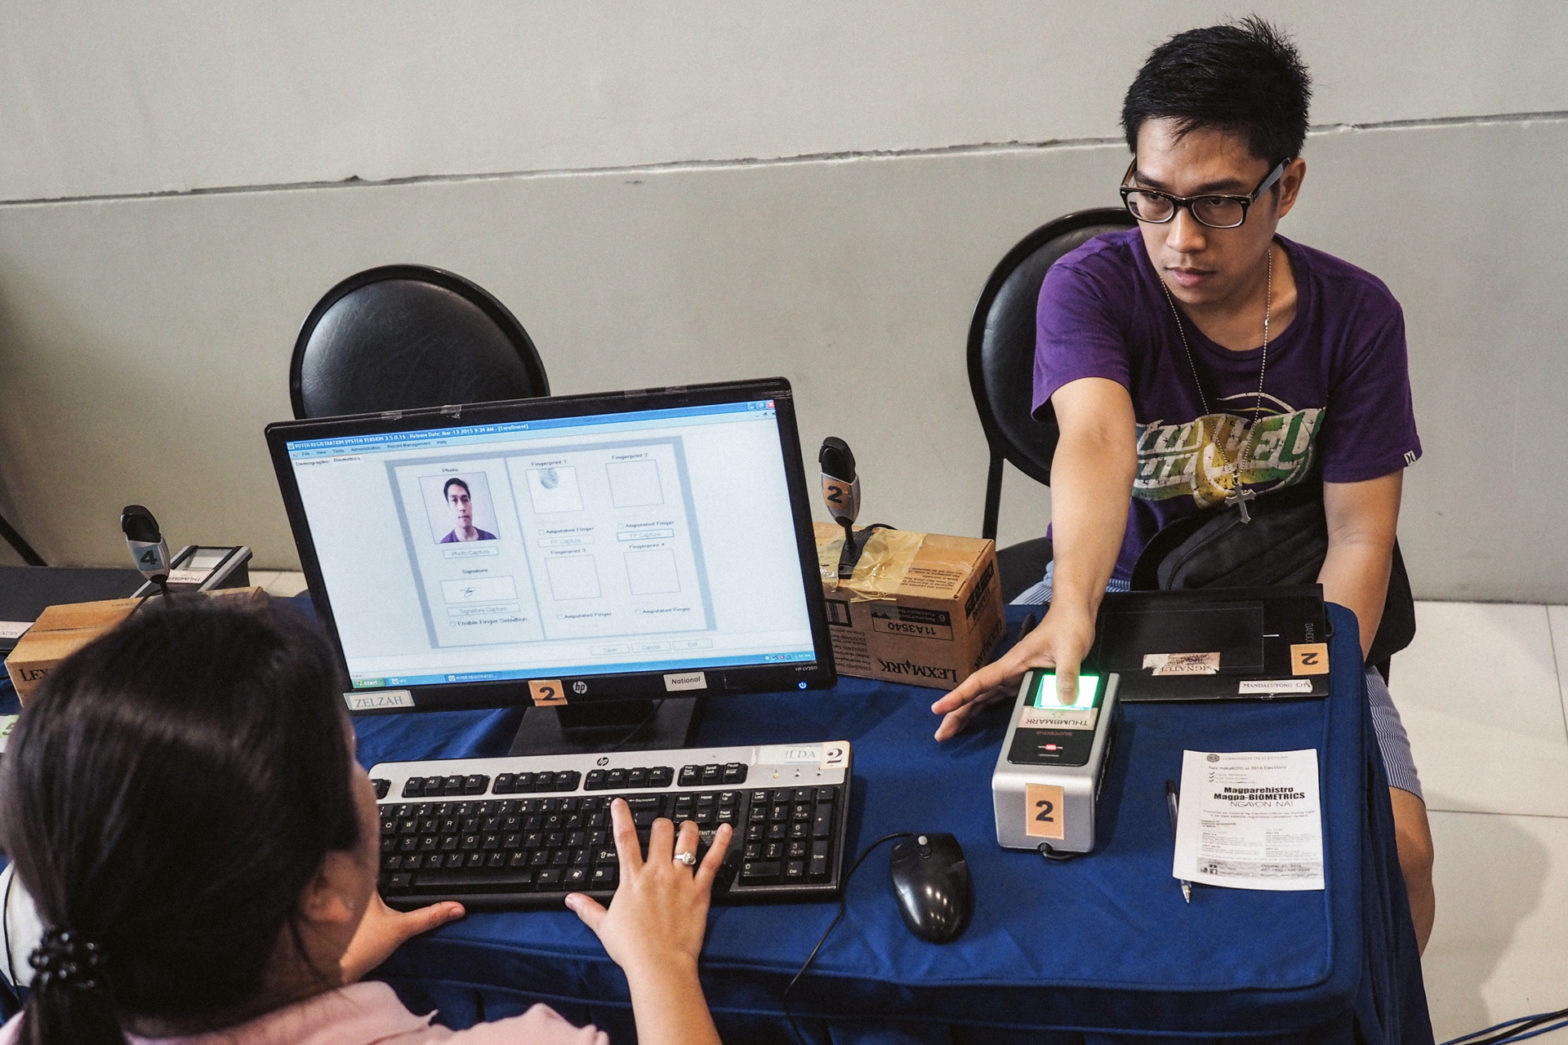 Without the proper biometrics data voters will not be able to vote in 2016. Photo by MARIO IGNACIO IV